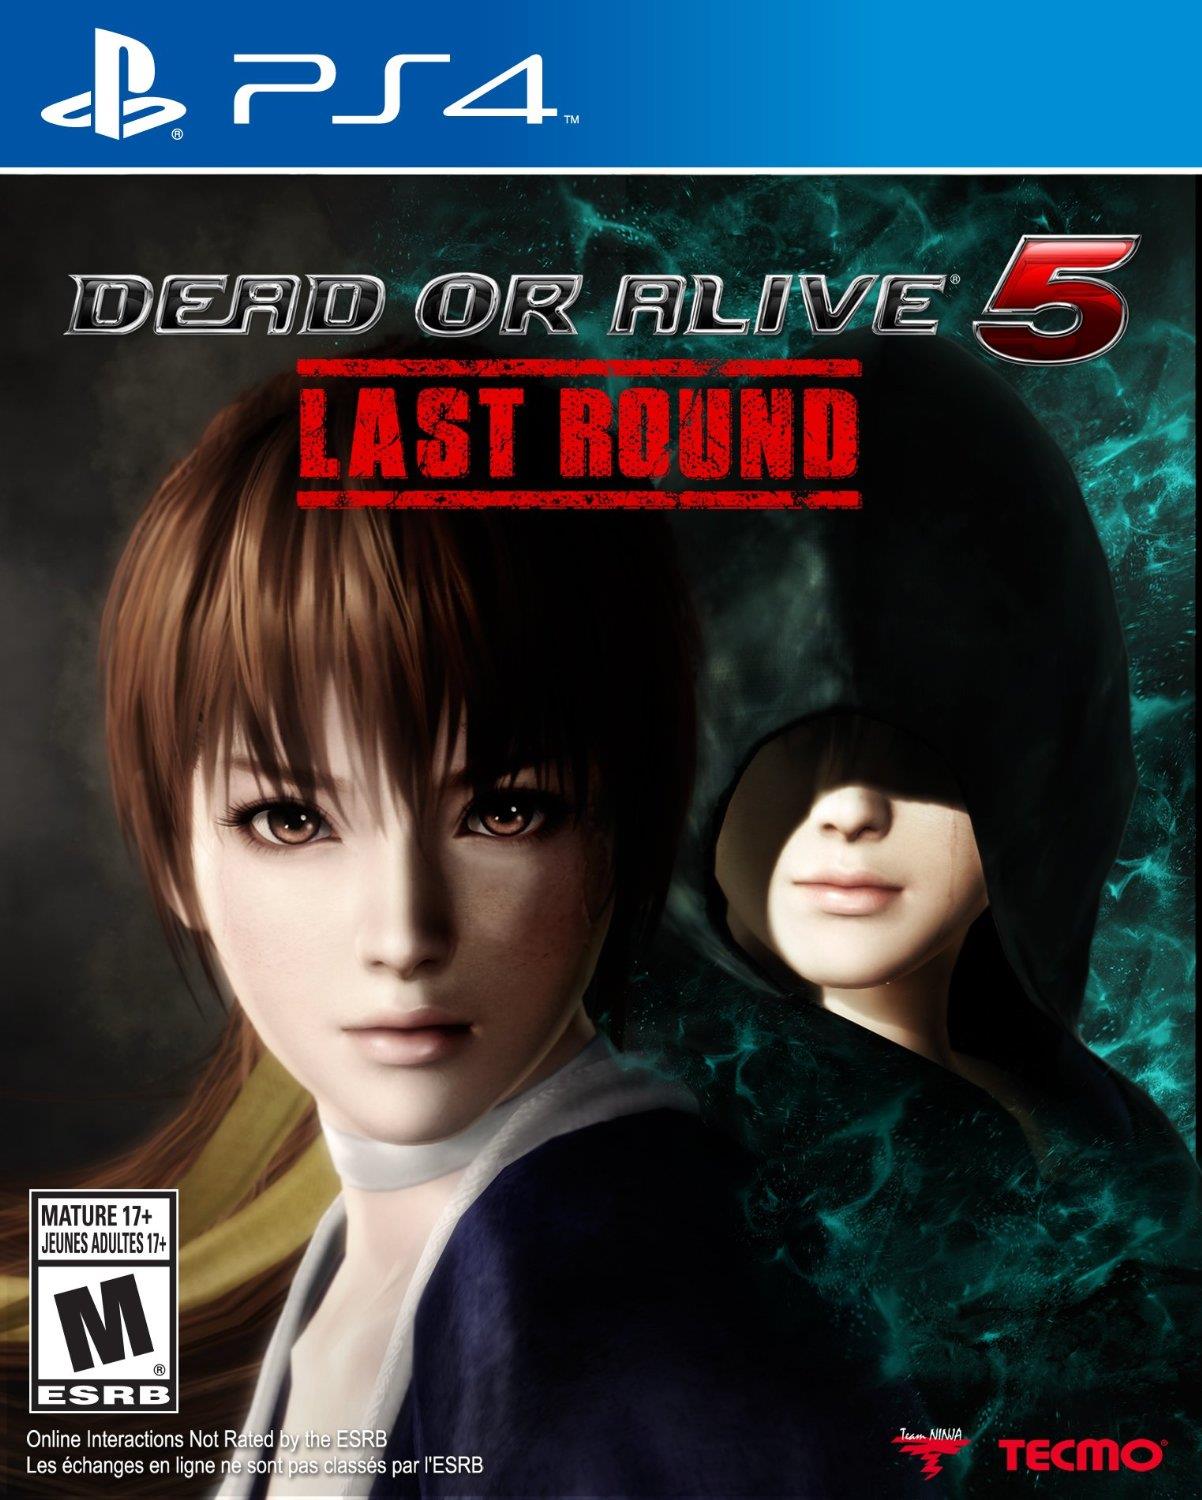 Dead or Alive 5: Last Round Tecmo Koei PlayStation 4 040198002608 - image 1 of 4